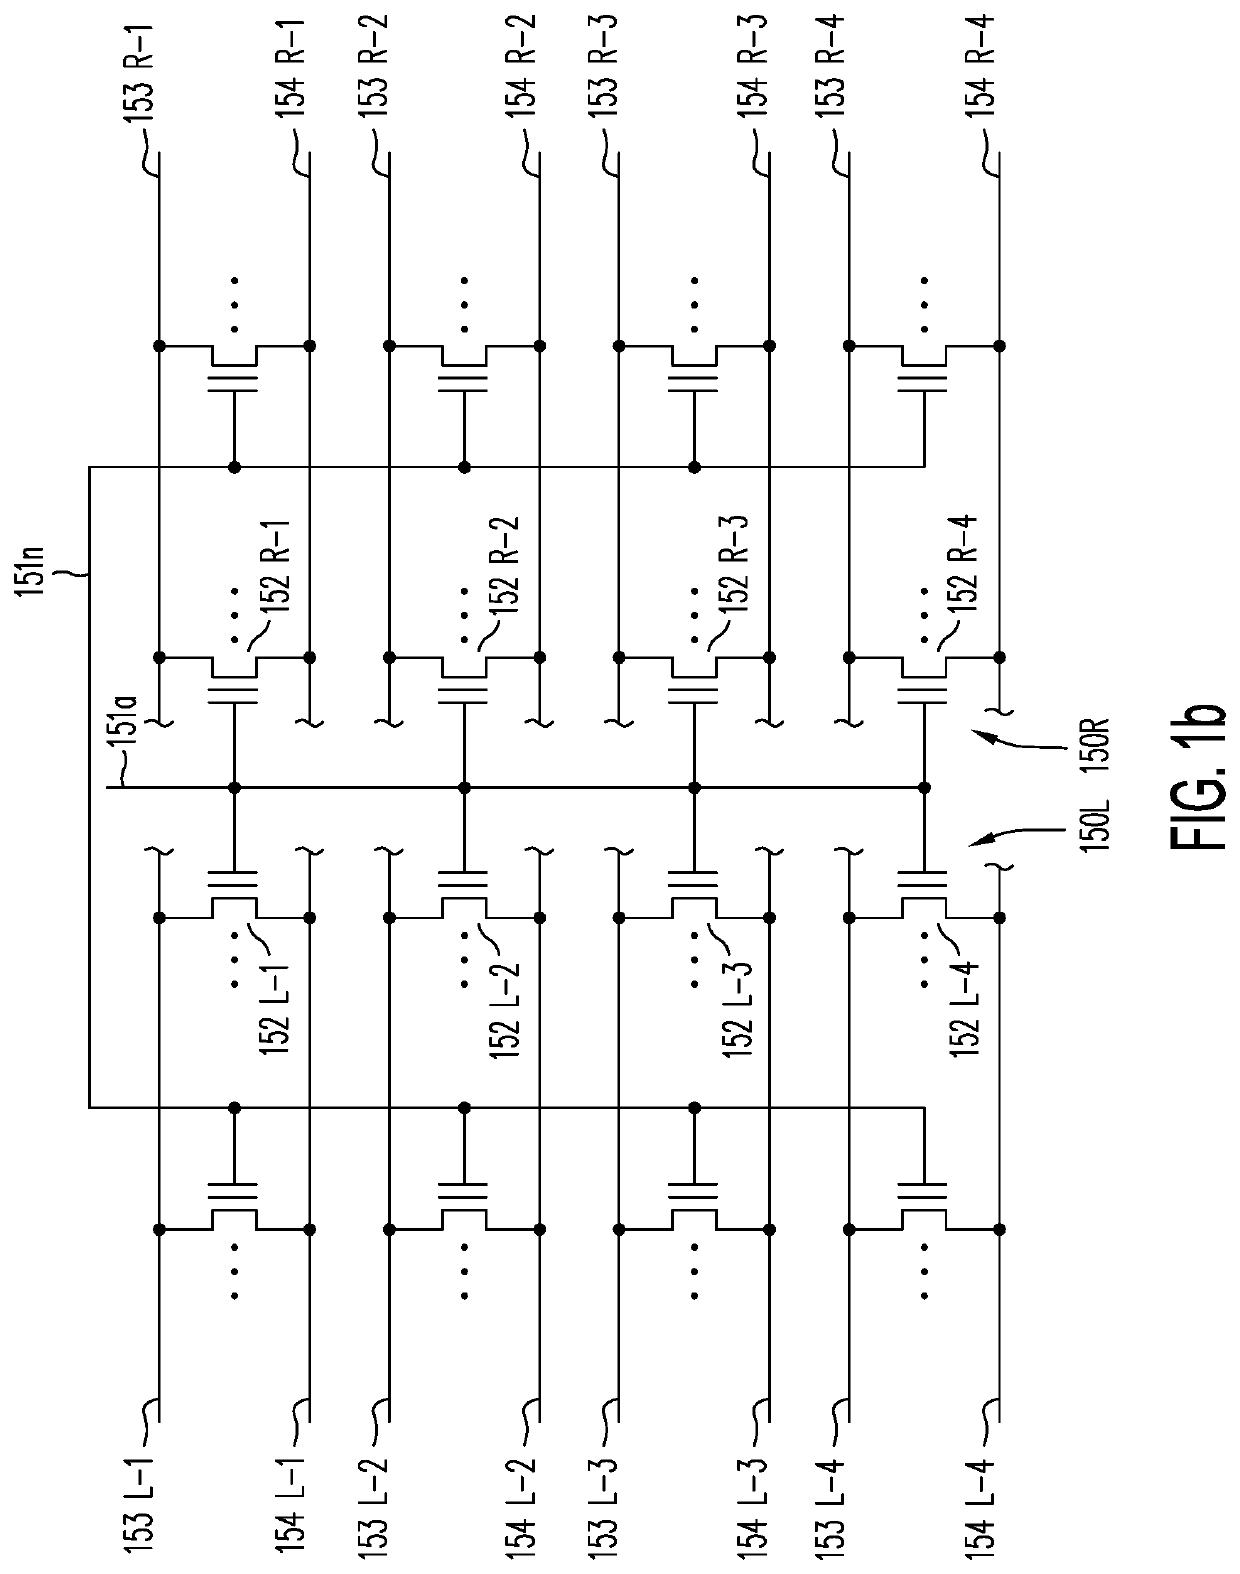 Implementing logic function and generating analog signals using nor memory strings